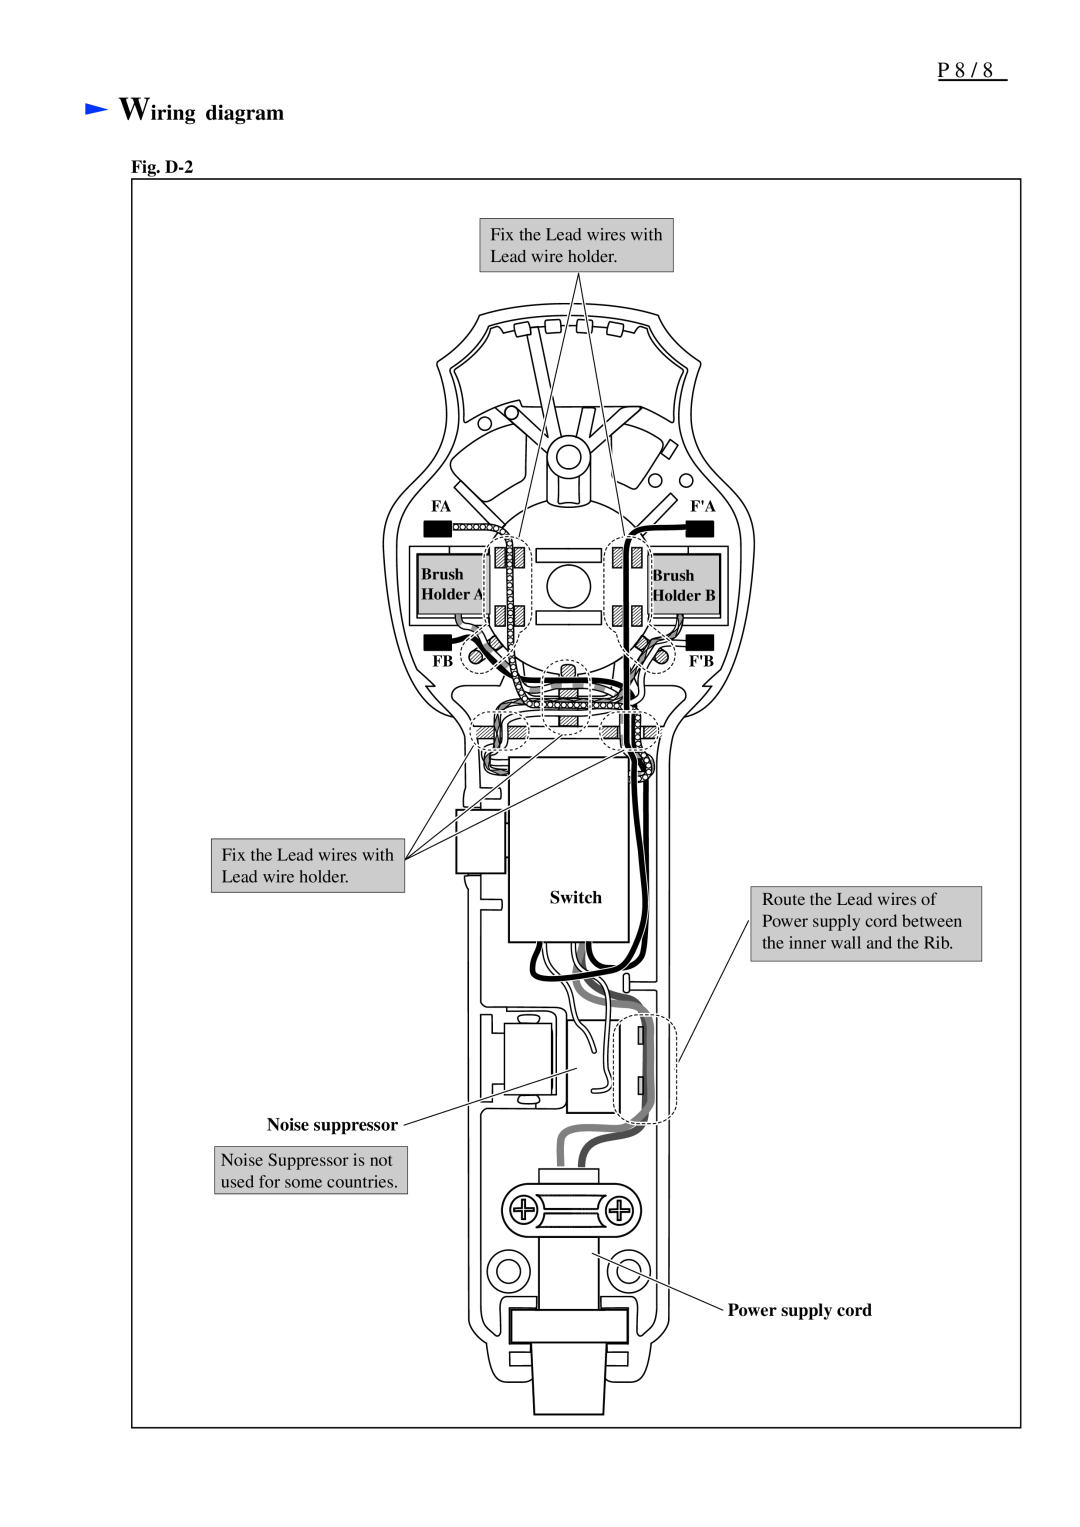 Makita DP4011, DP4010 Wiring diagram, Fig. D-2, Switch, Noise suppressor, Power supply cord, FA Brush Holder A FB 